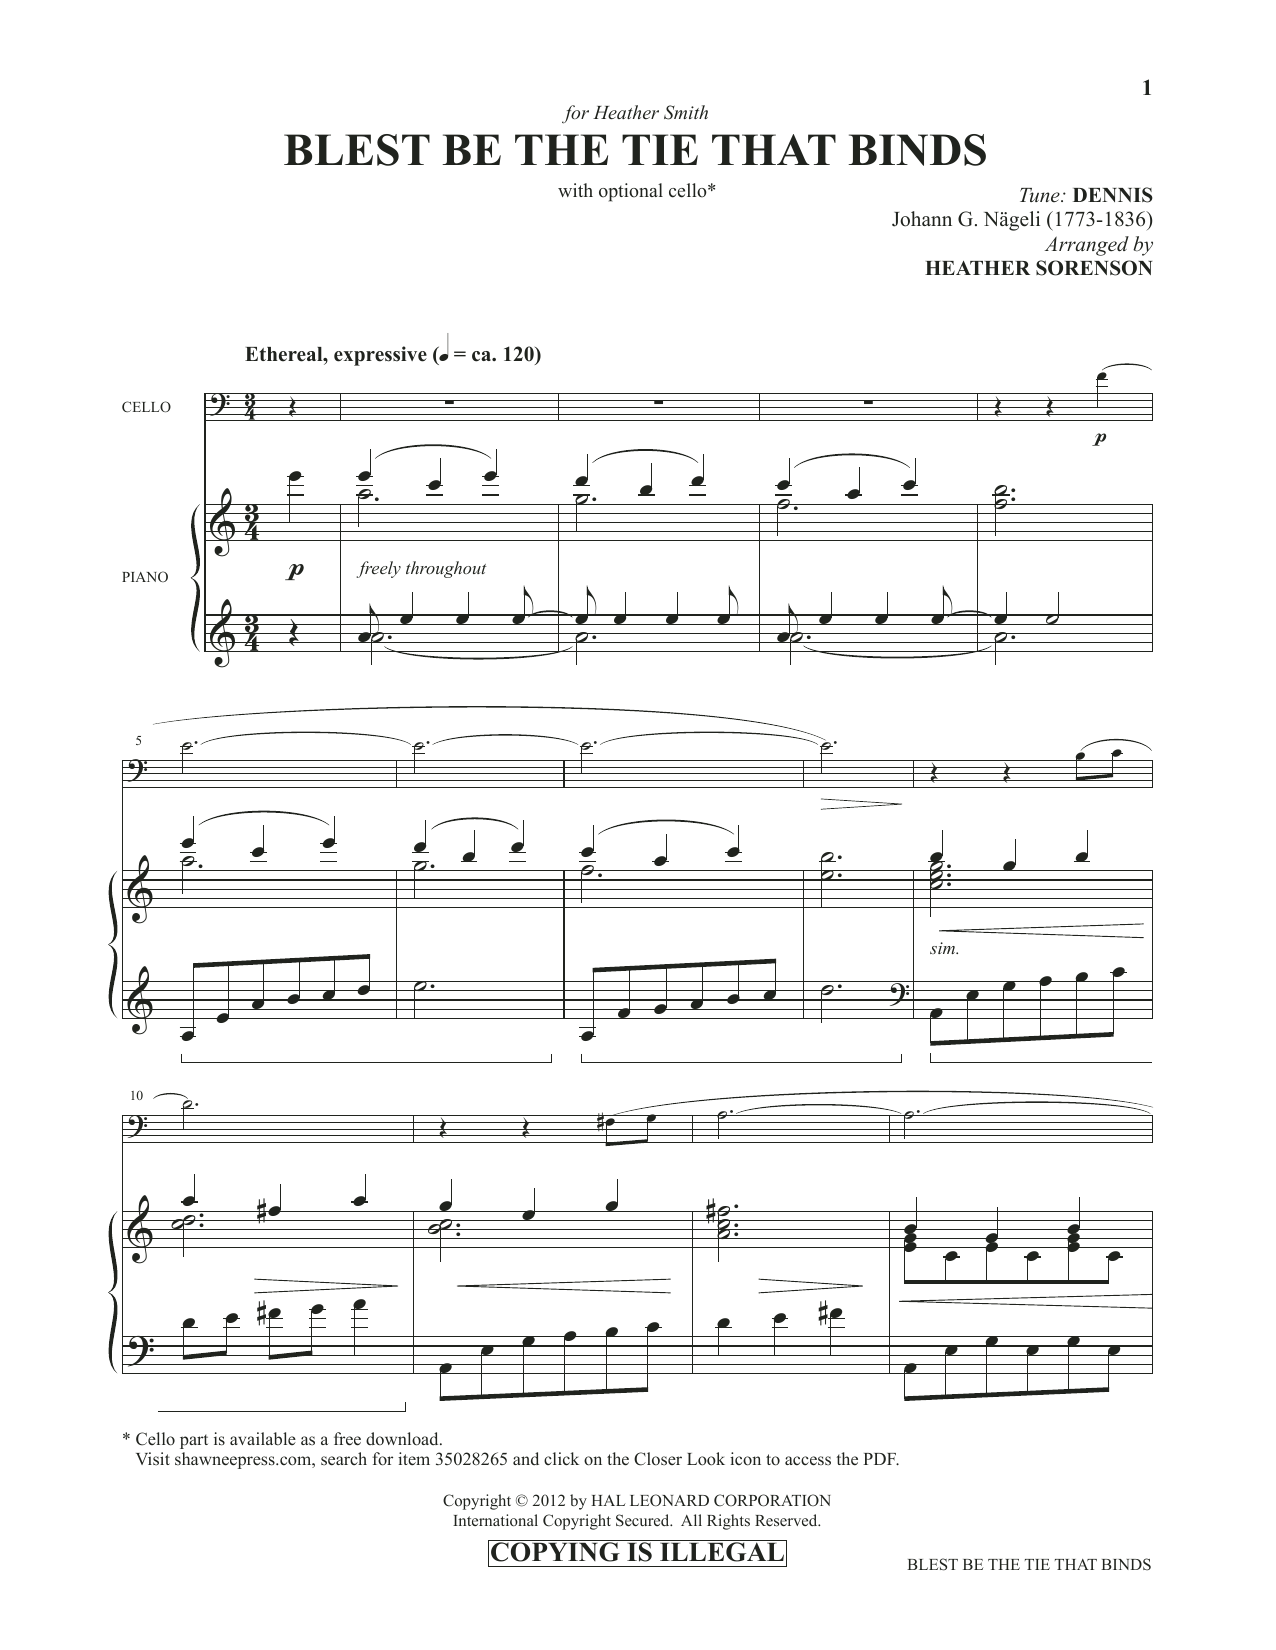 Download Heather Sorenson Blest Be The Tie That Binds (from Image Sheet Music